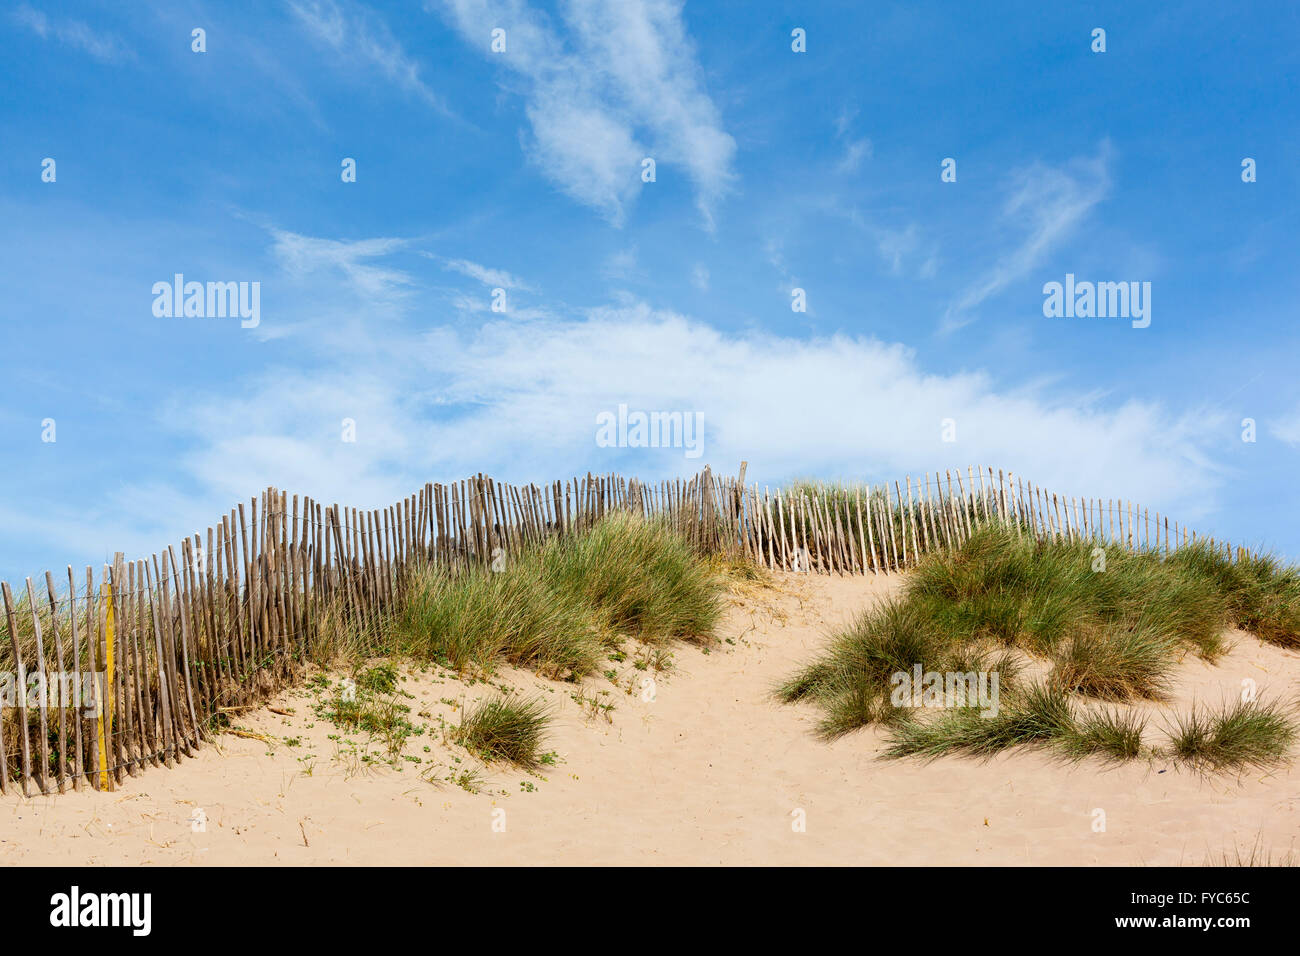 Sand dunes with grass, wooden fence and a clear summer sky. Stock Photo